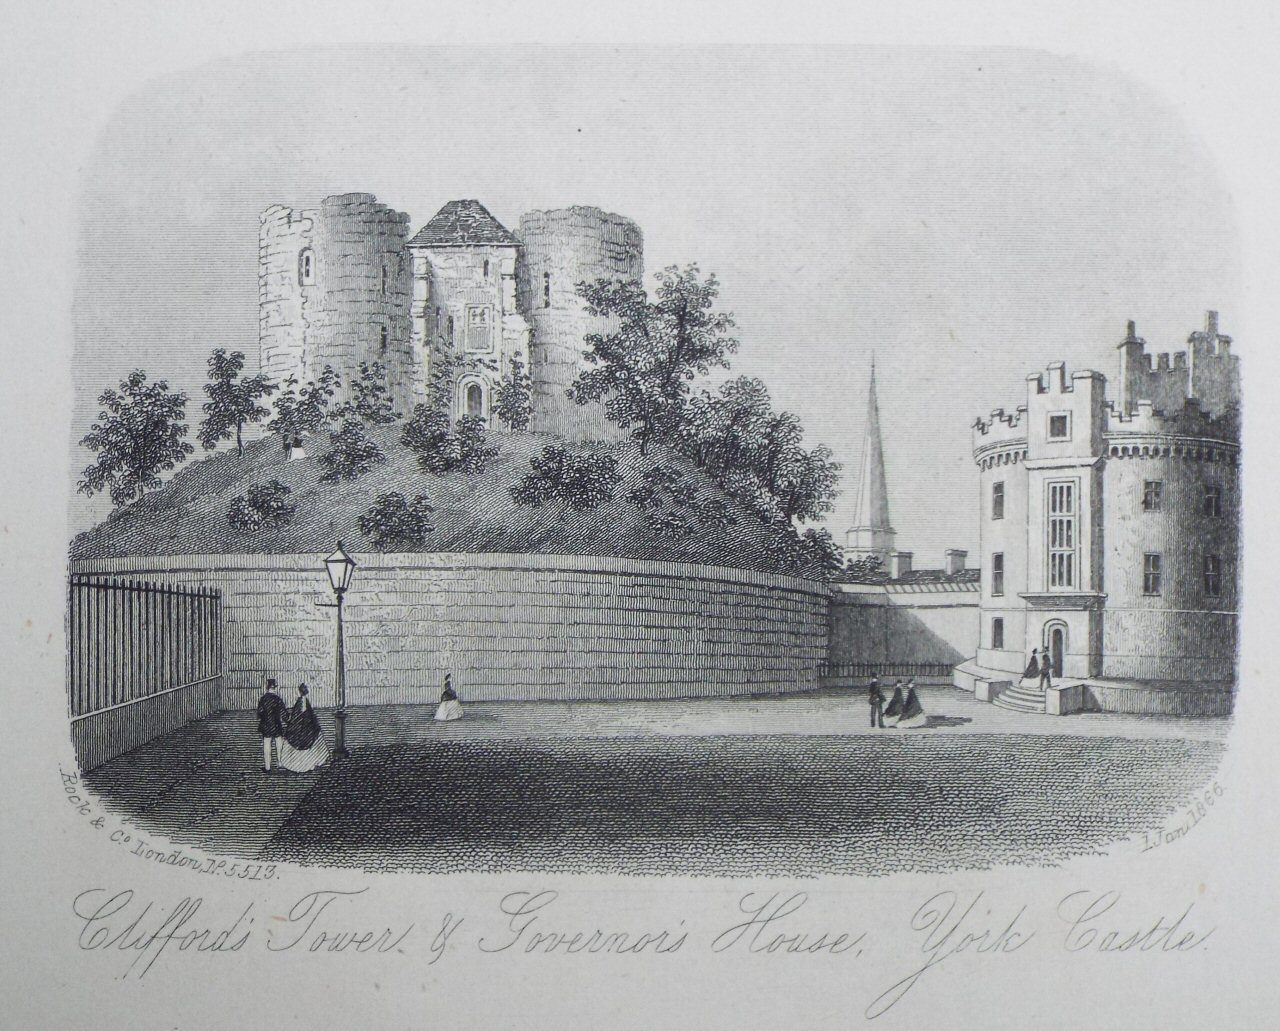 Steel Vignette - Clifford's Tower & Governor's House, York. - Rock